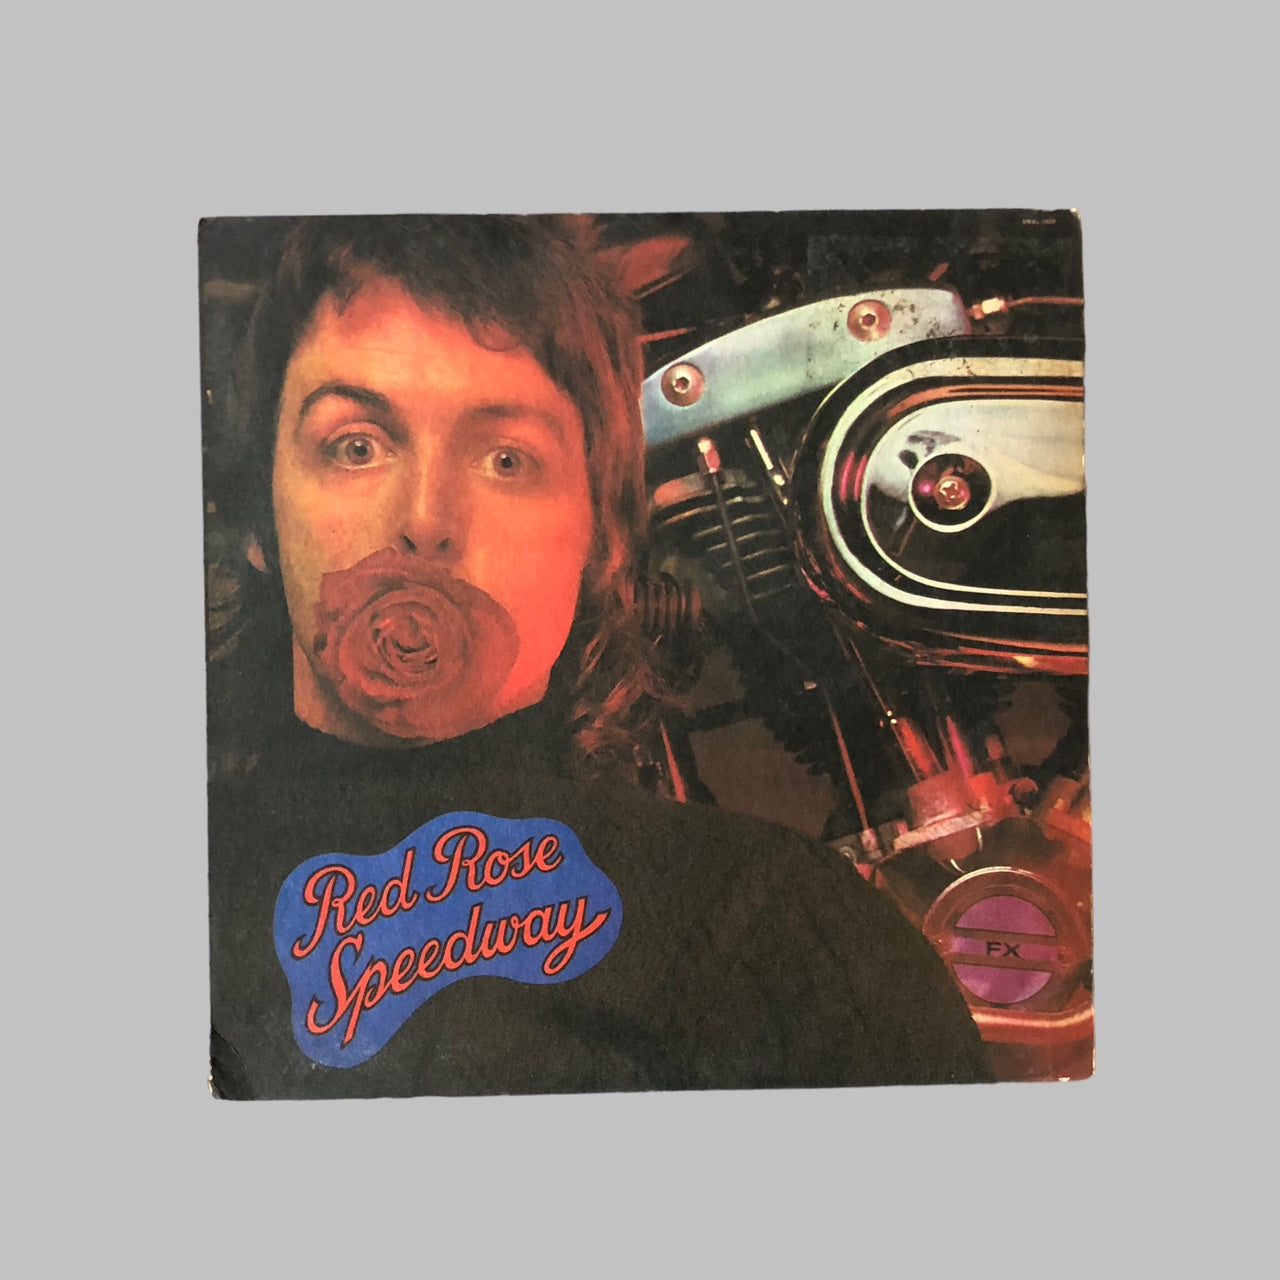 LP Vinyl - Paul McCartney and the Wings - Red Rose Speedway.